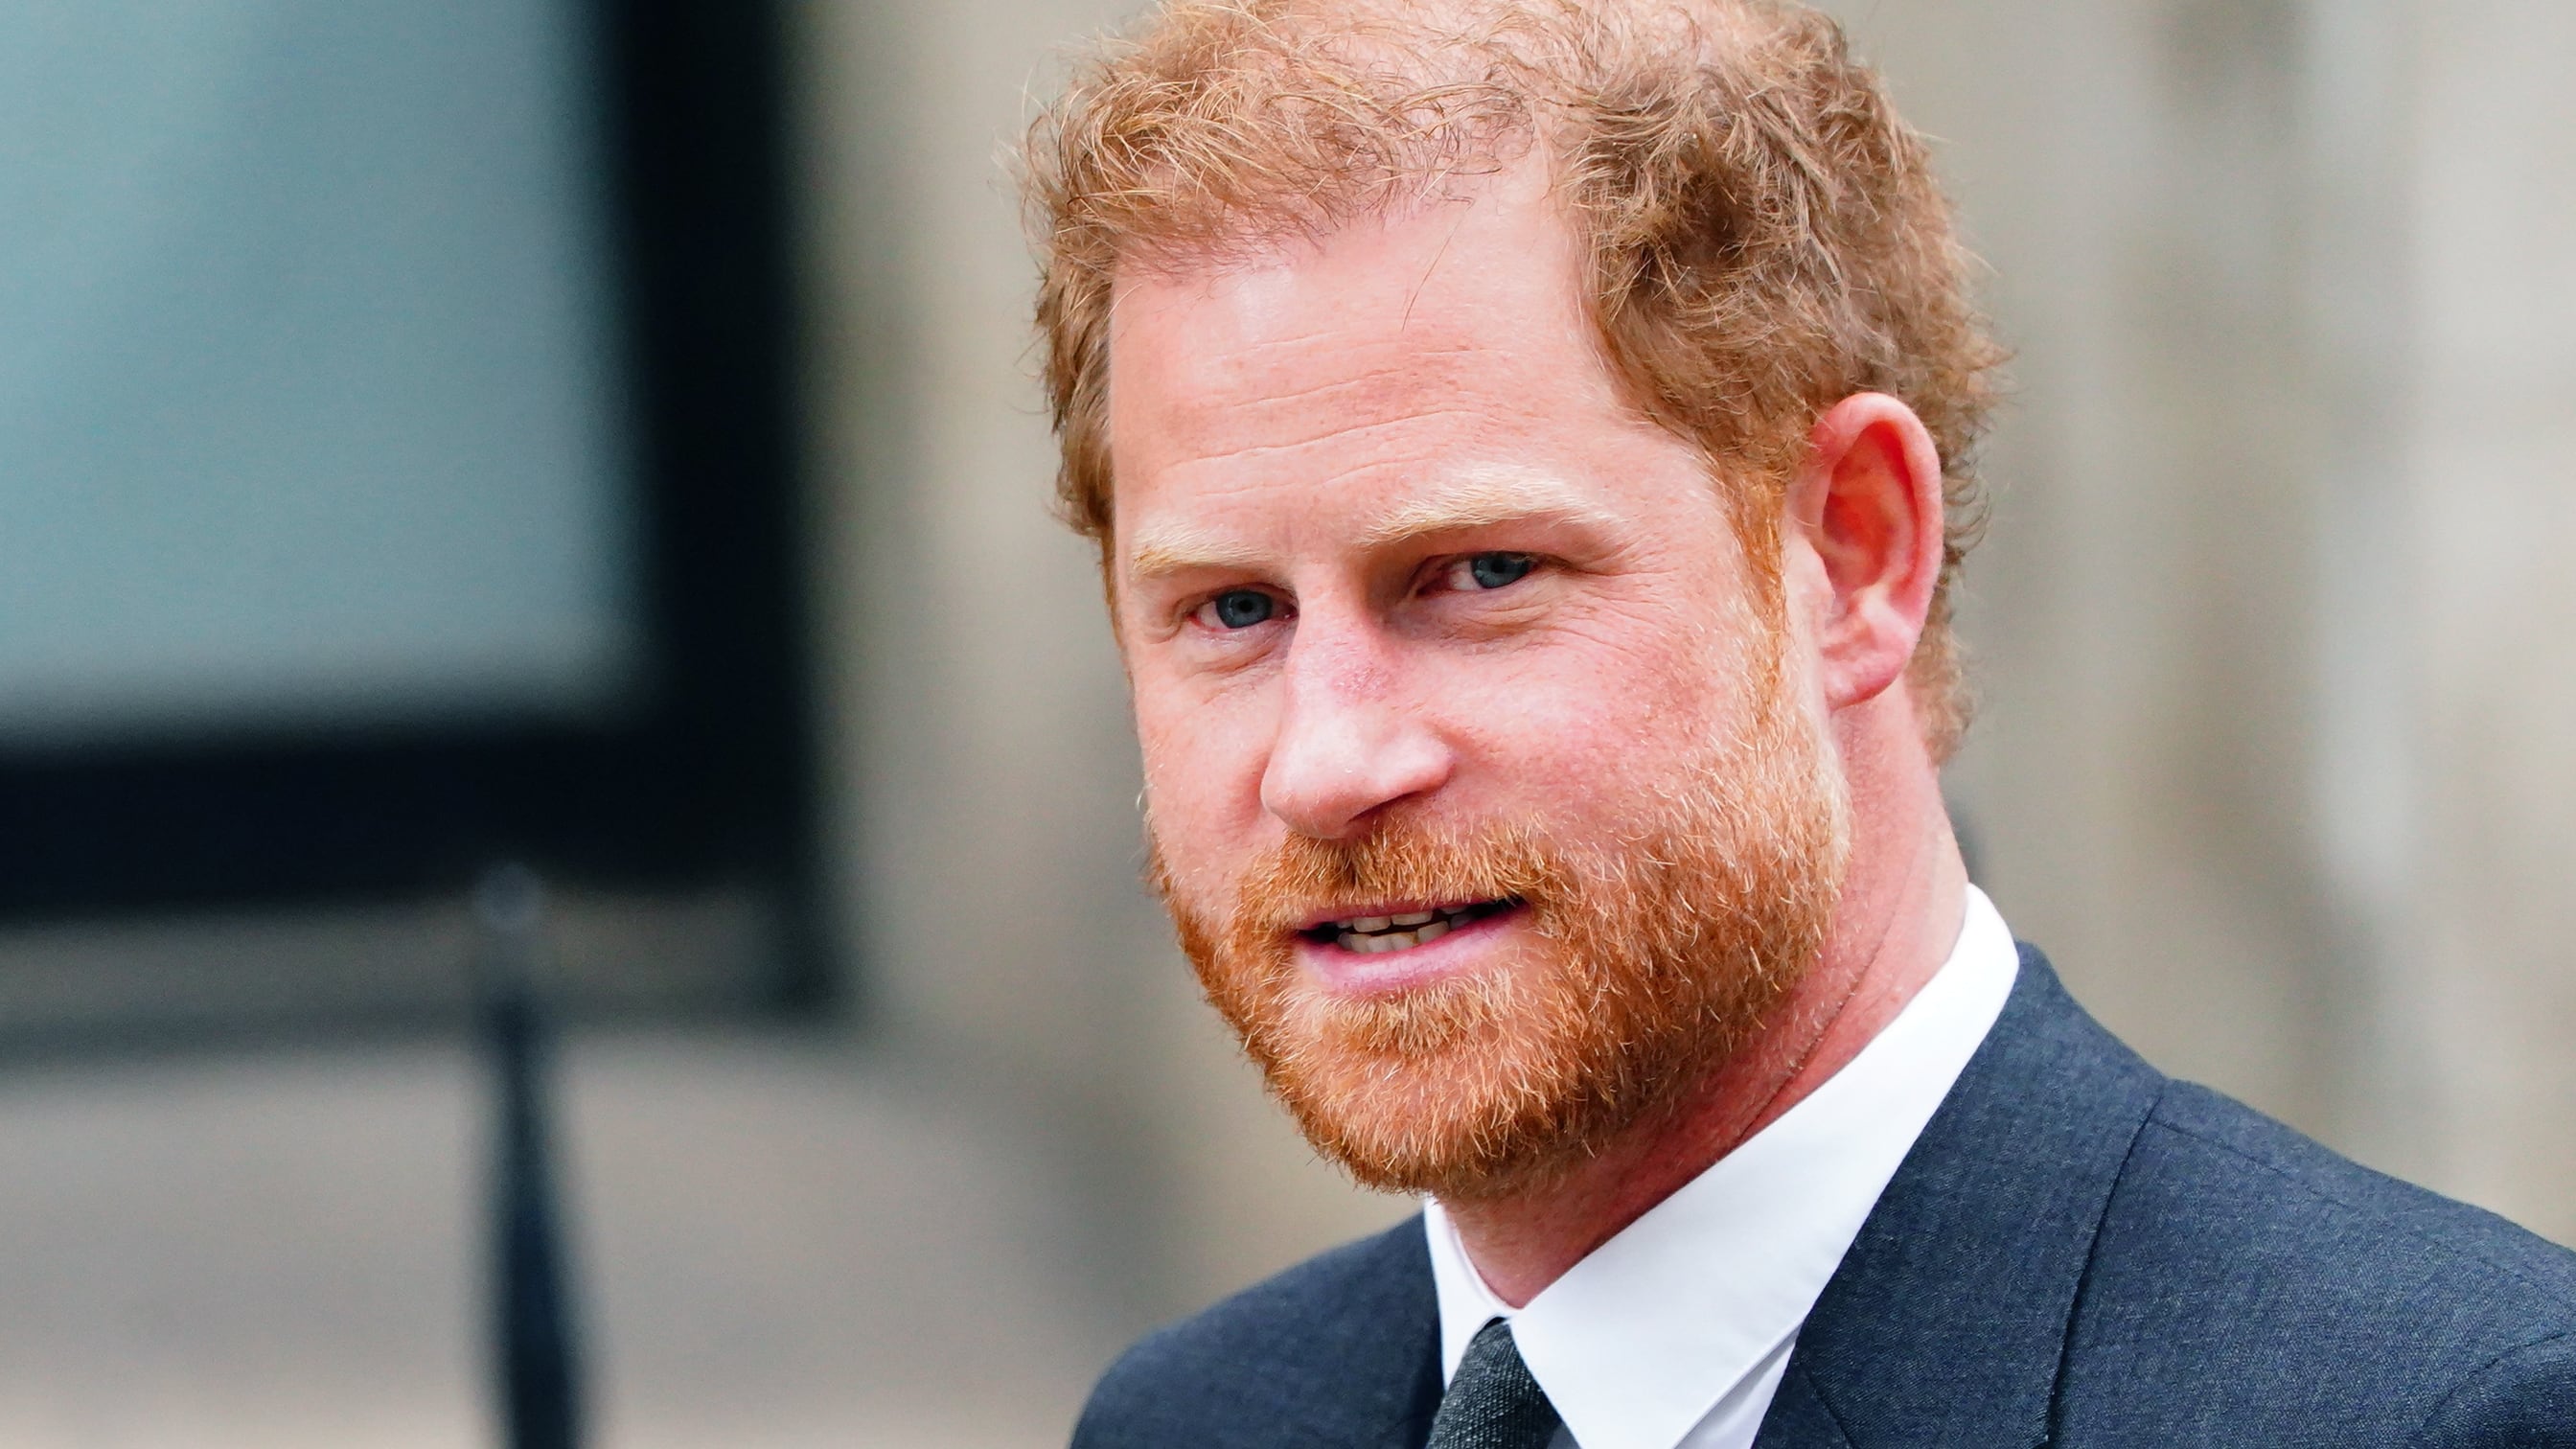 The Duke of Sussex is bringing a High Court case against NGN over allegations of unlawful information gathering